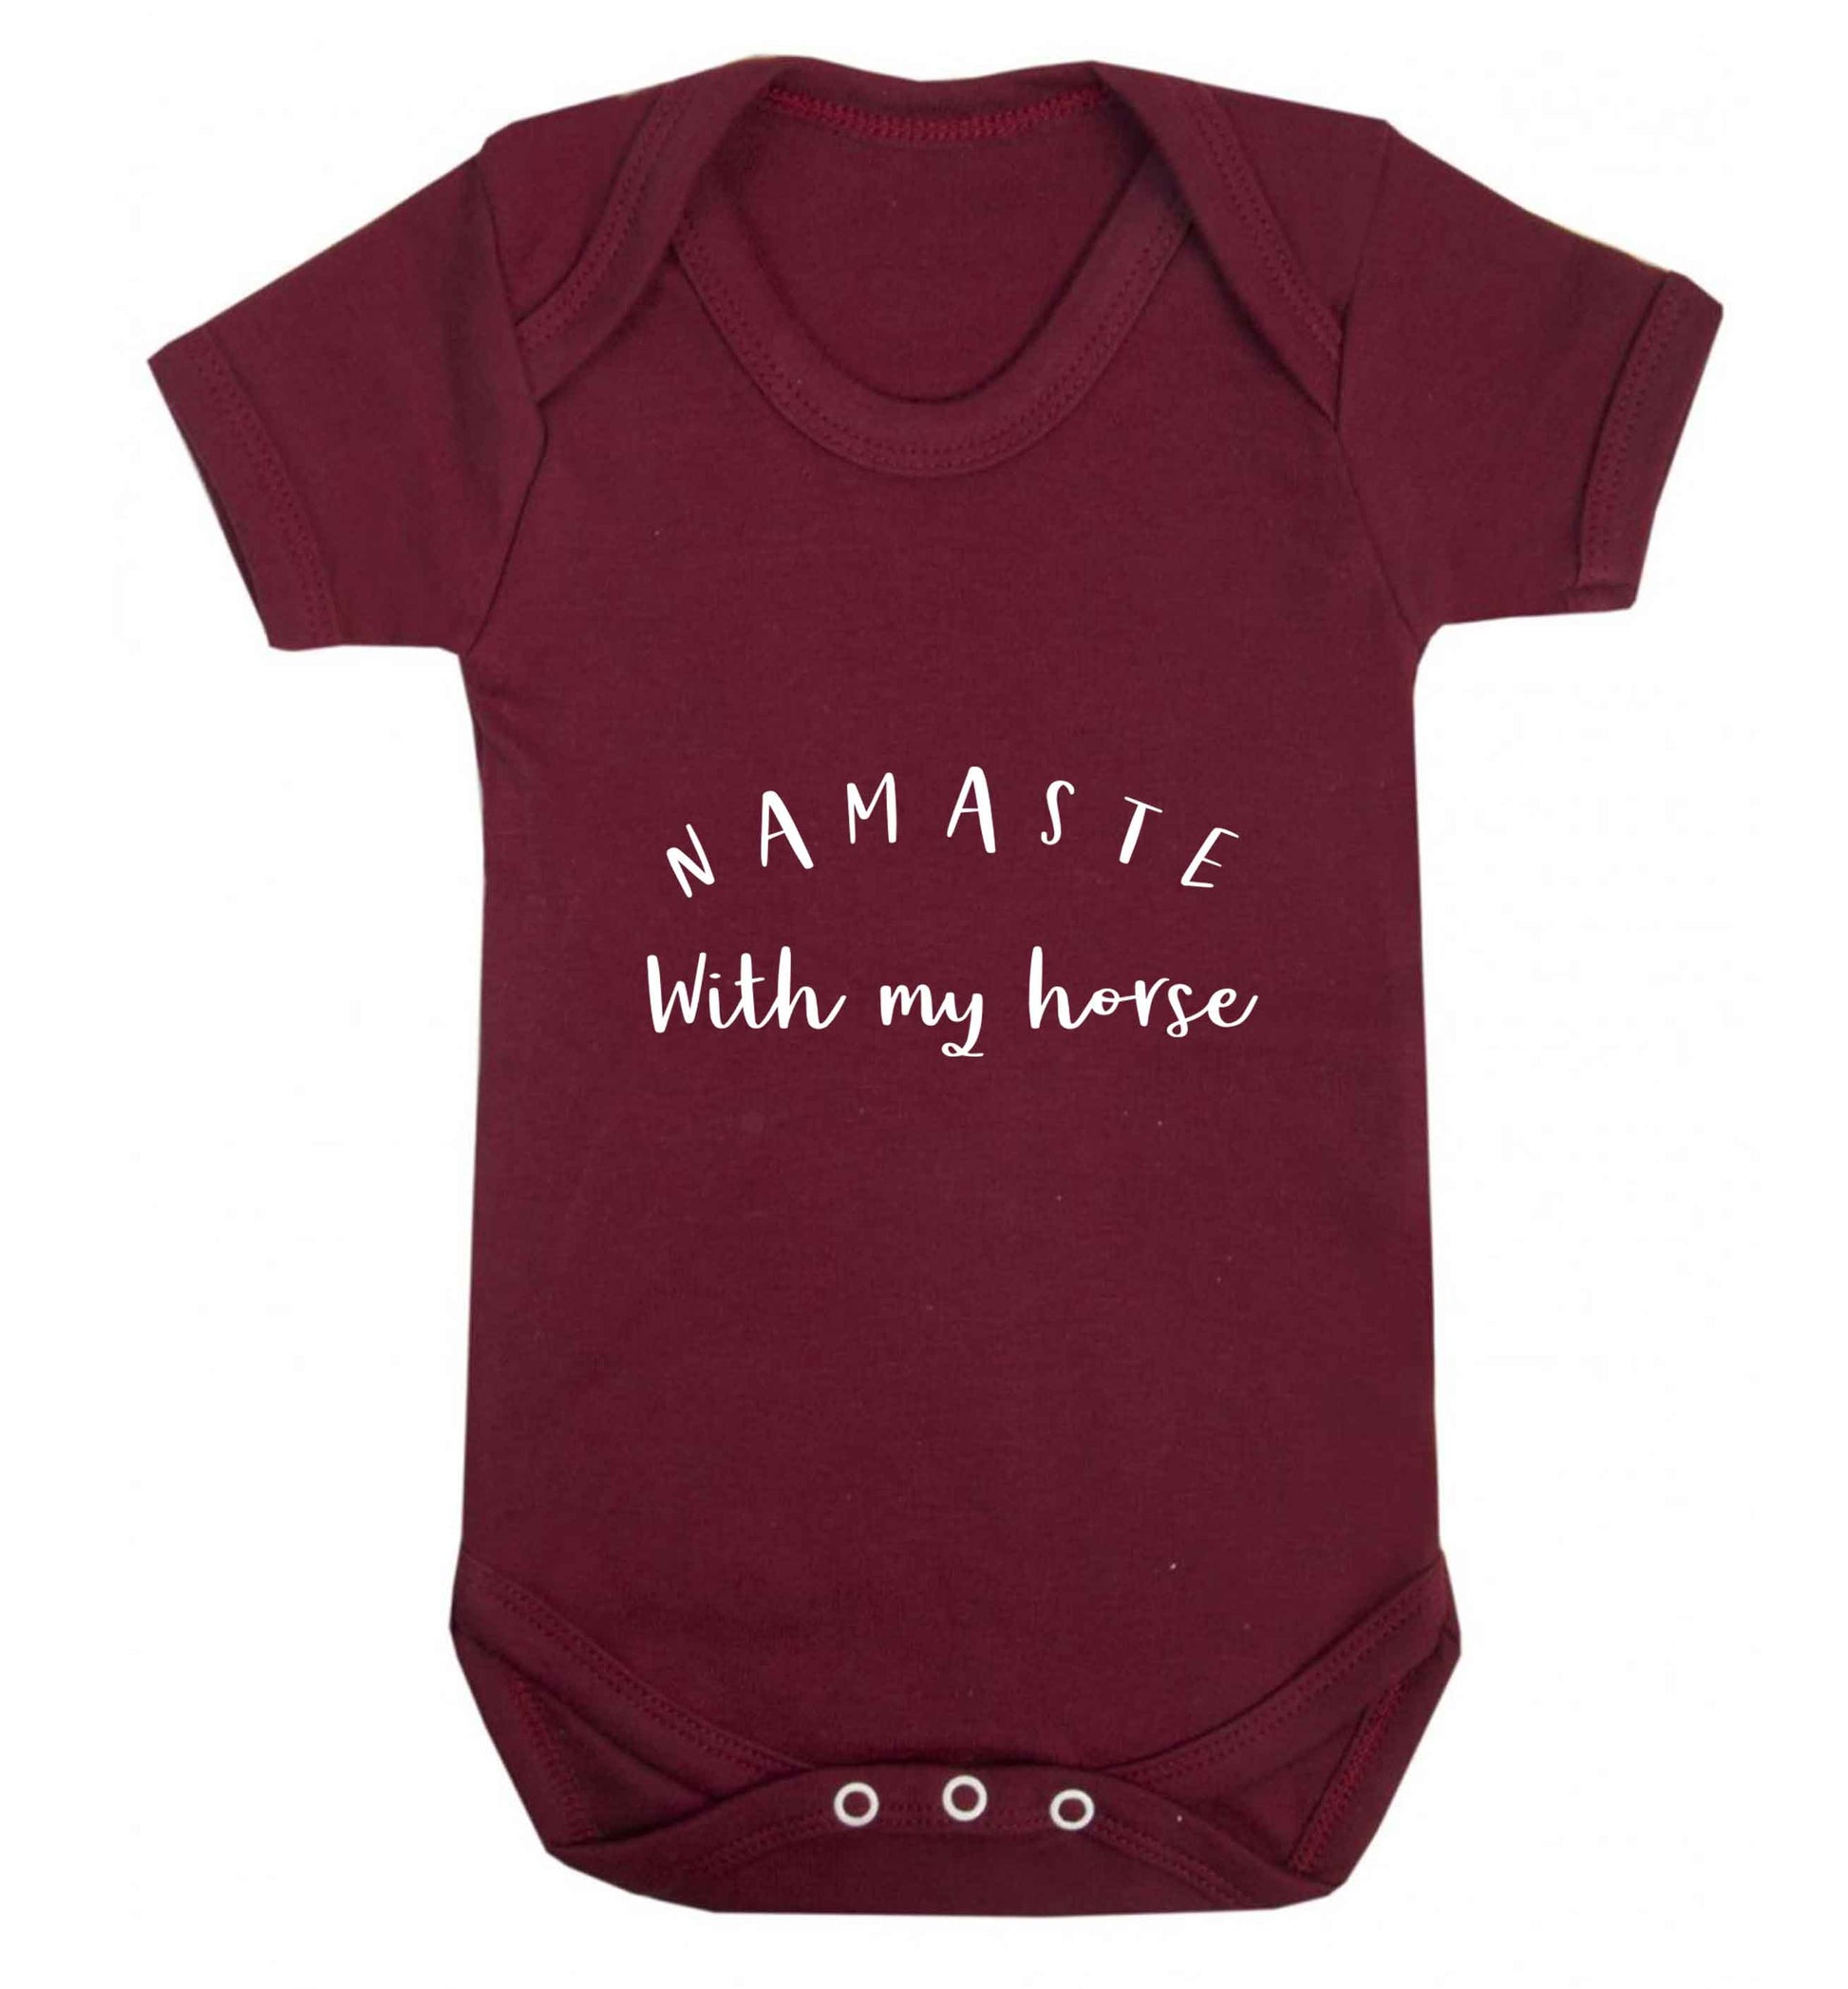 Namaste with my horse baby vest maroon 18-24 months